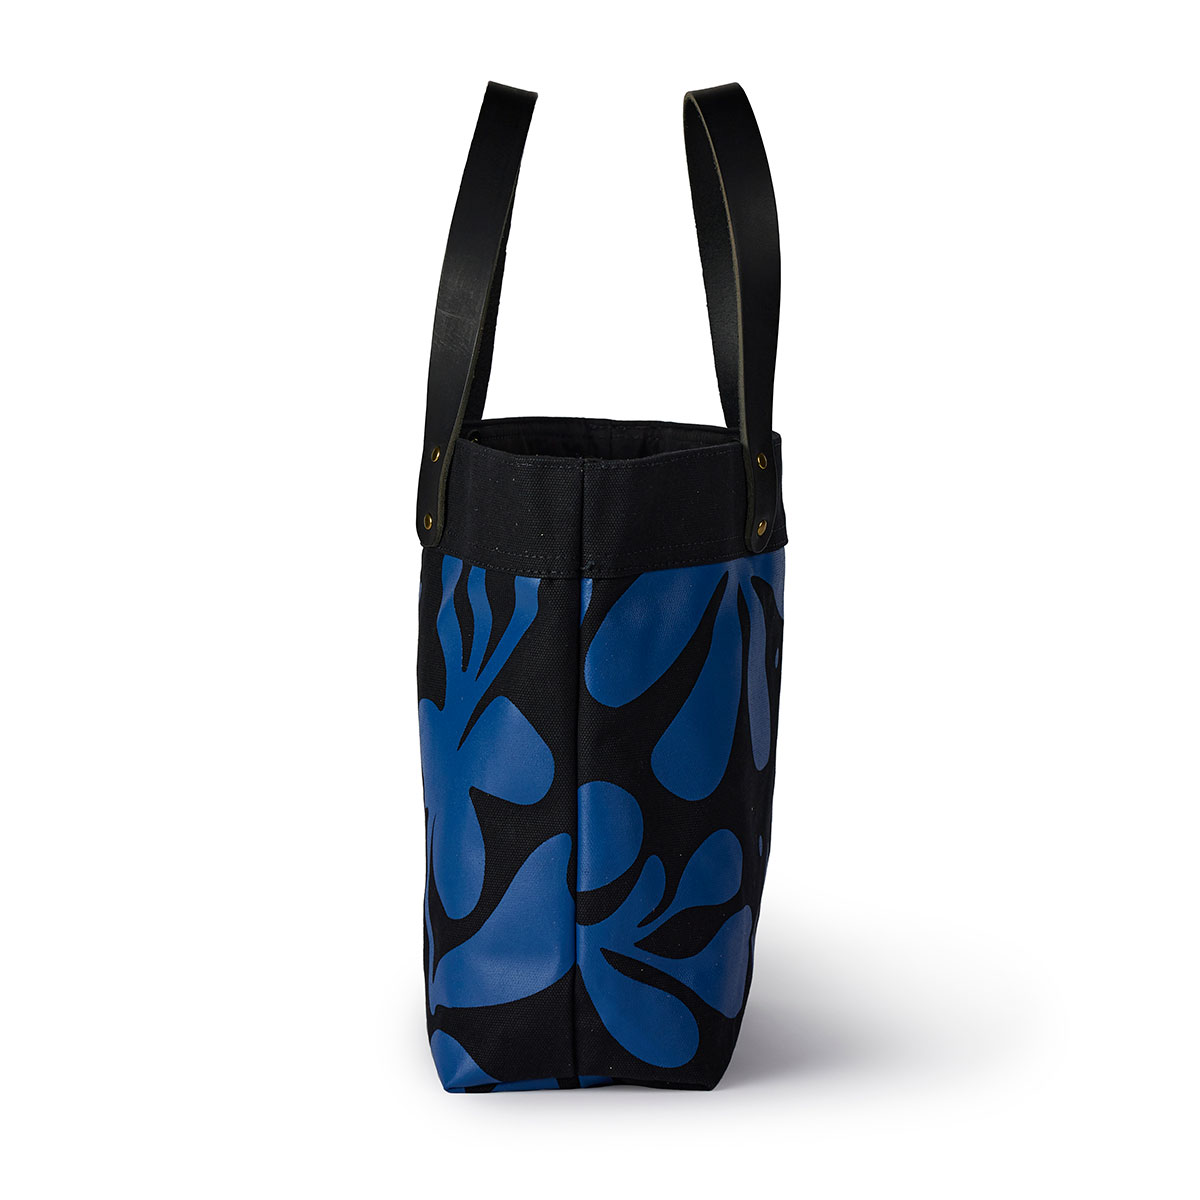 Side profile of Black and blue Floral print tote by Angela Adams